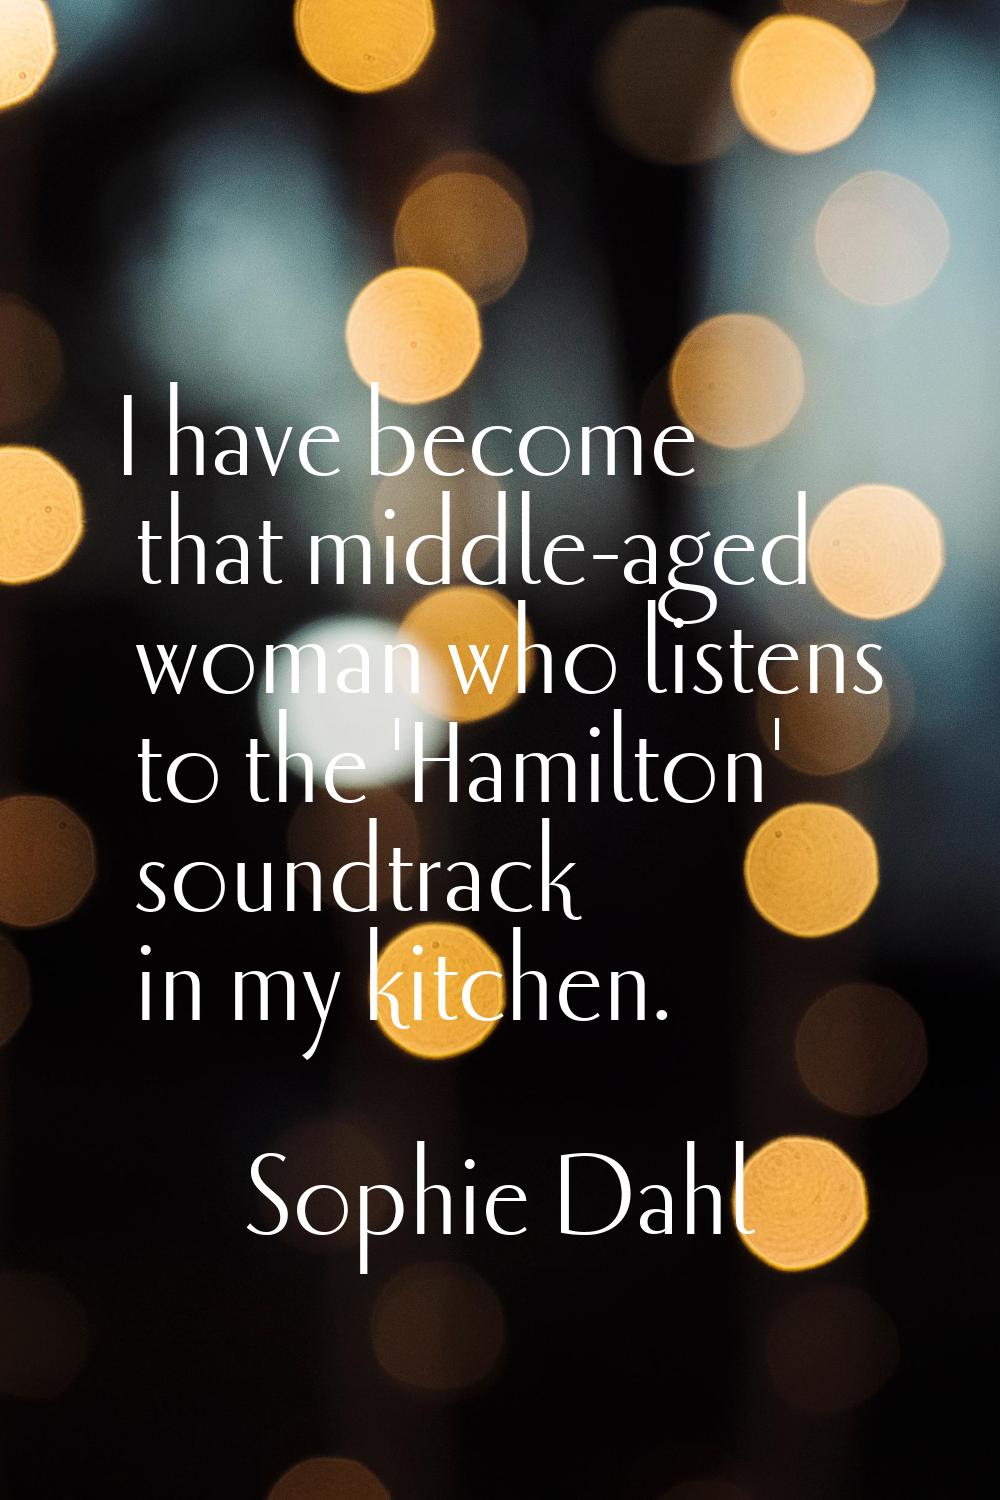 I have become that middle-aged woman who listens to the 'Hamilton' soundtrack in my kitchen.